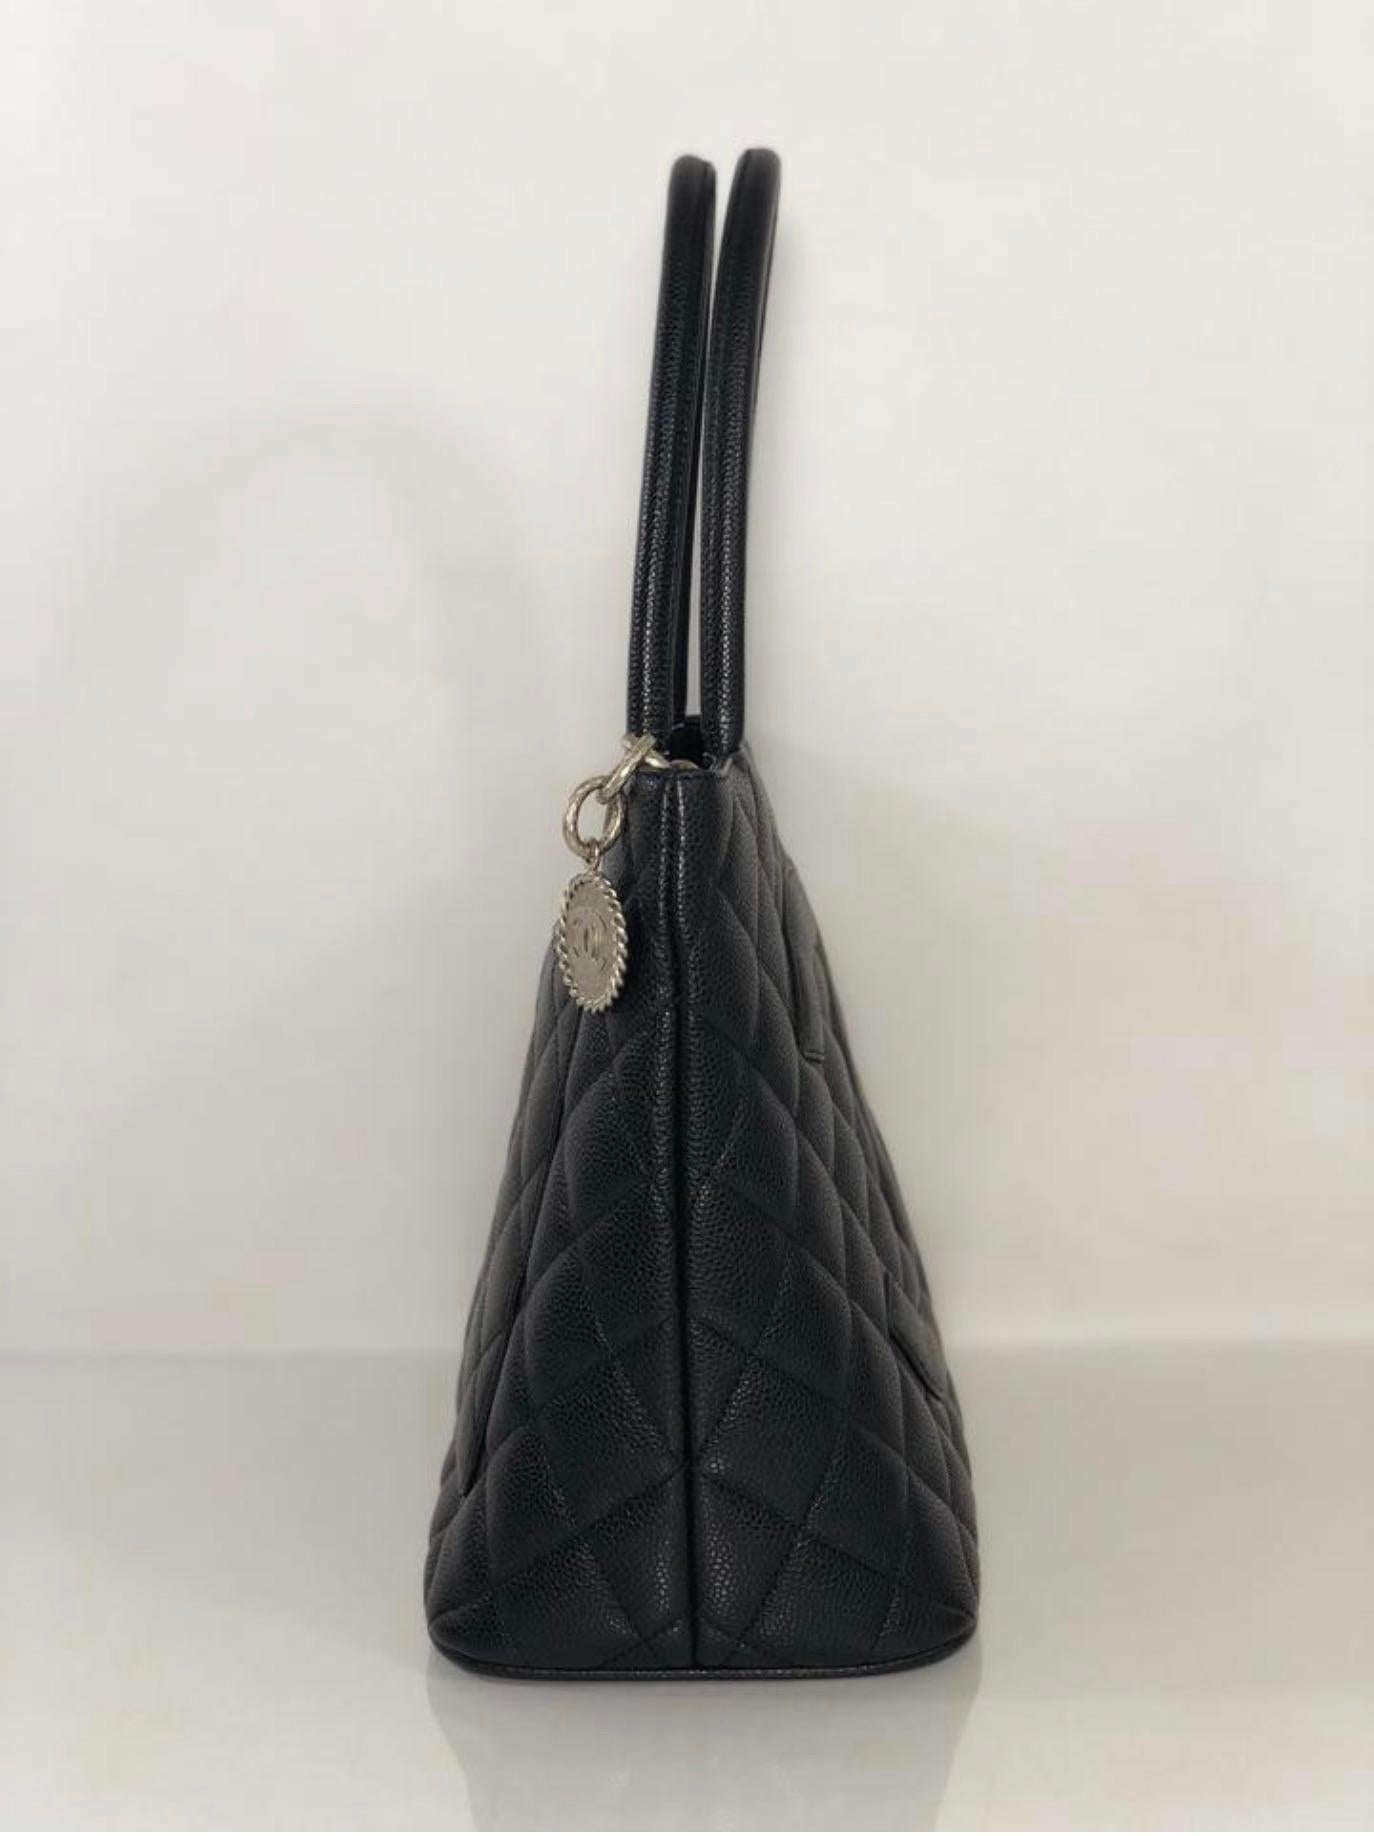 Chanel Caviar Leather Medallion with Silver Hardware in Black Shoulder Handbag In Excellent Condition For Sale In Saint Charles, IL